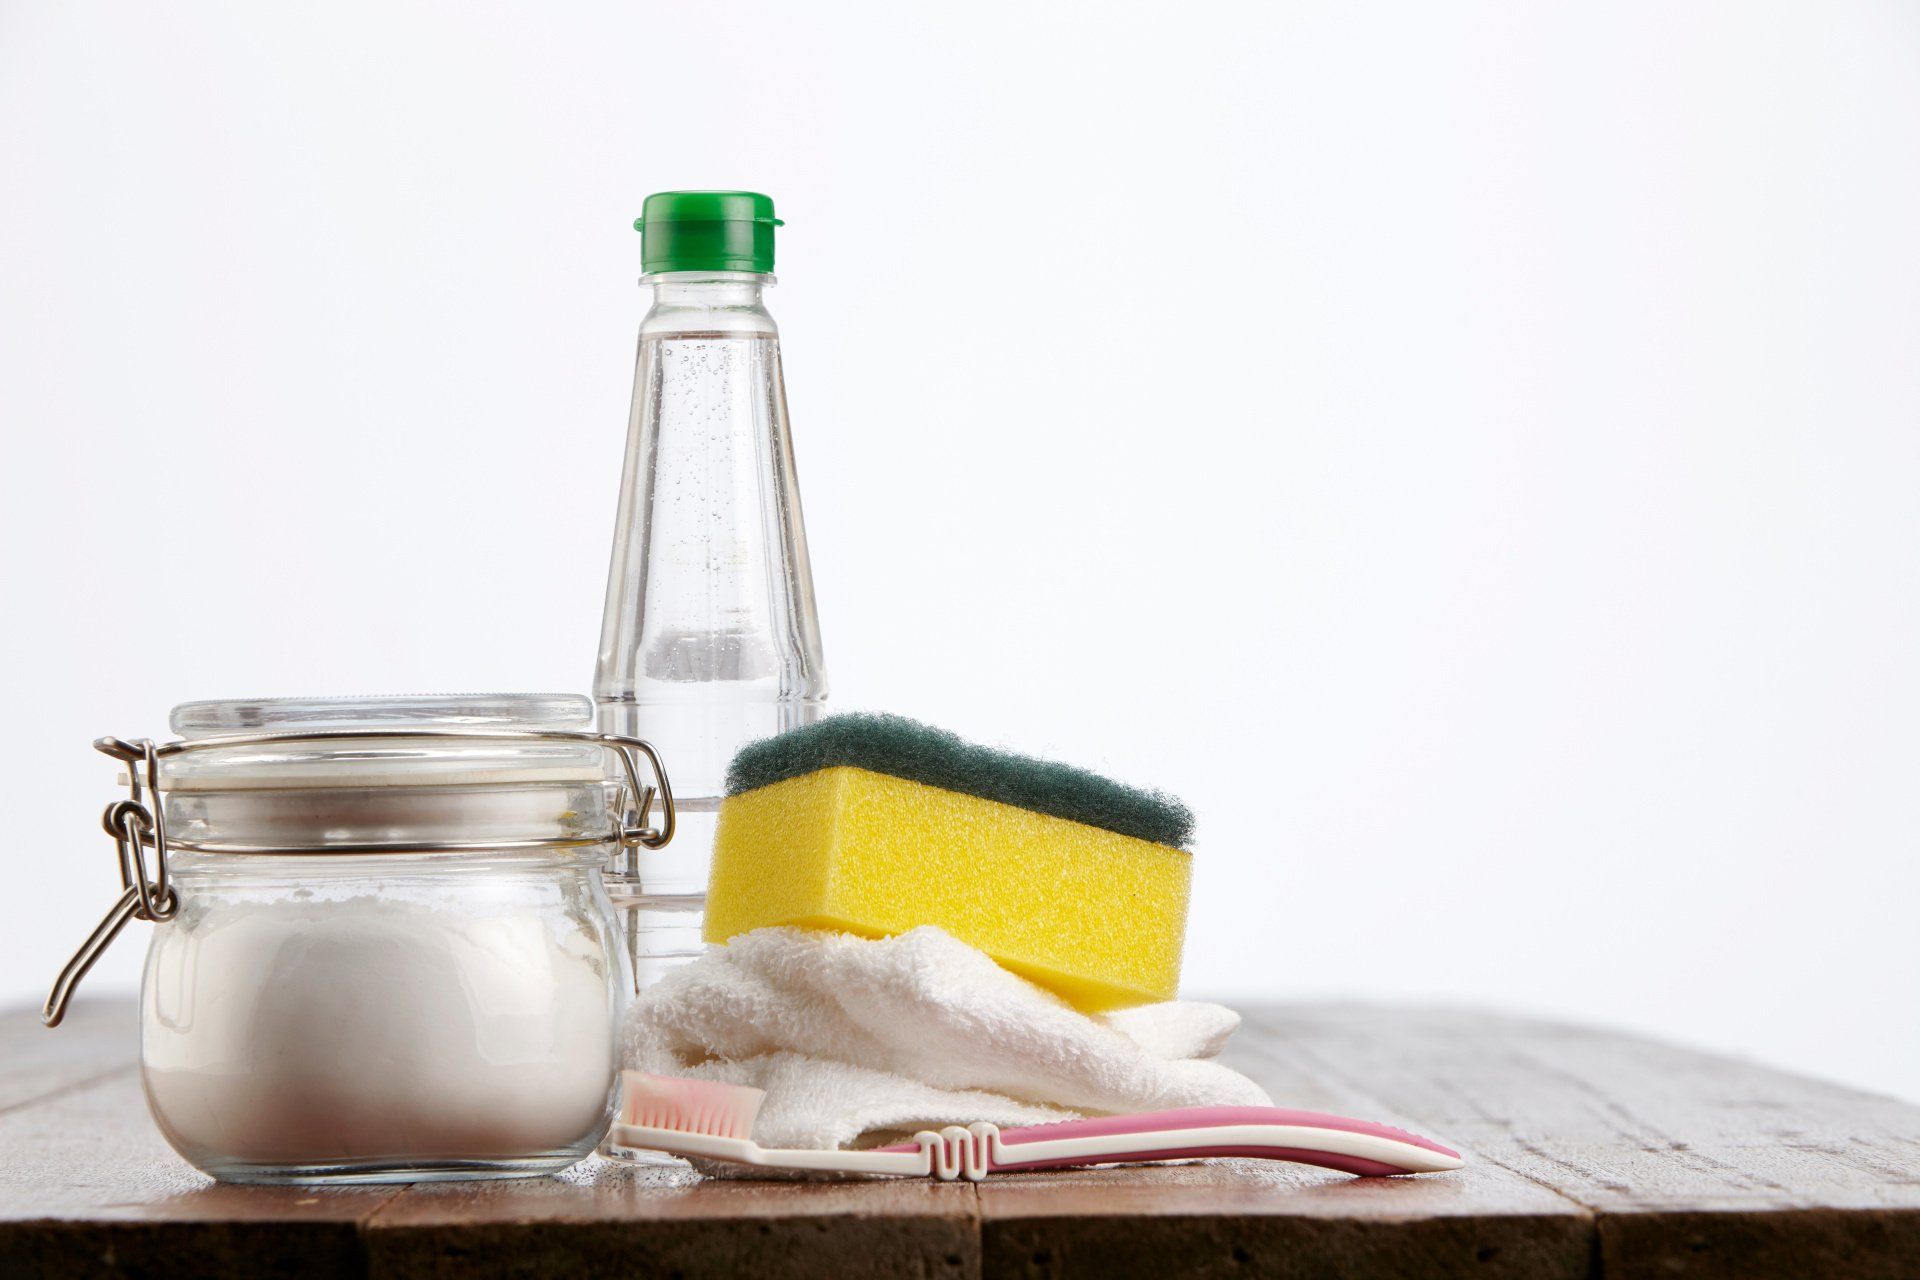 vinegar and baking soda, as well as other cleaning tools